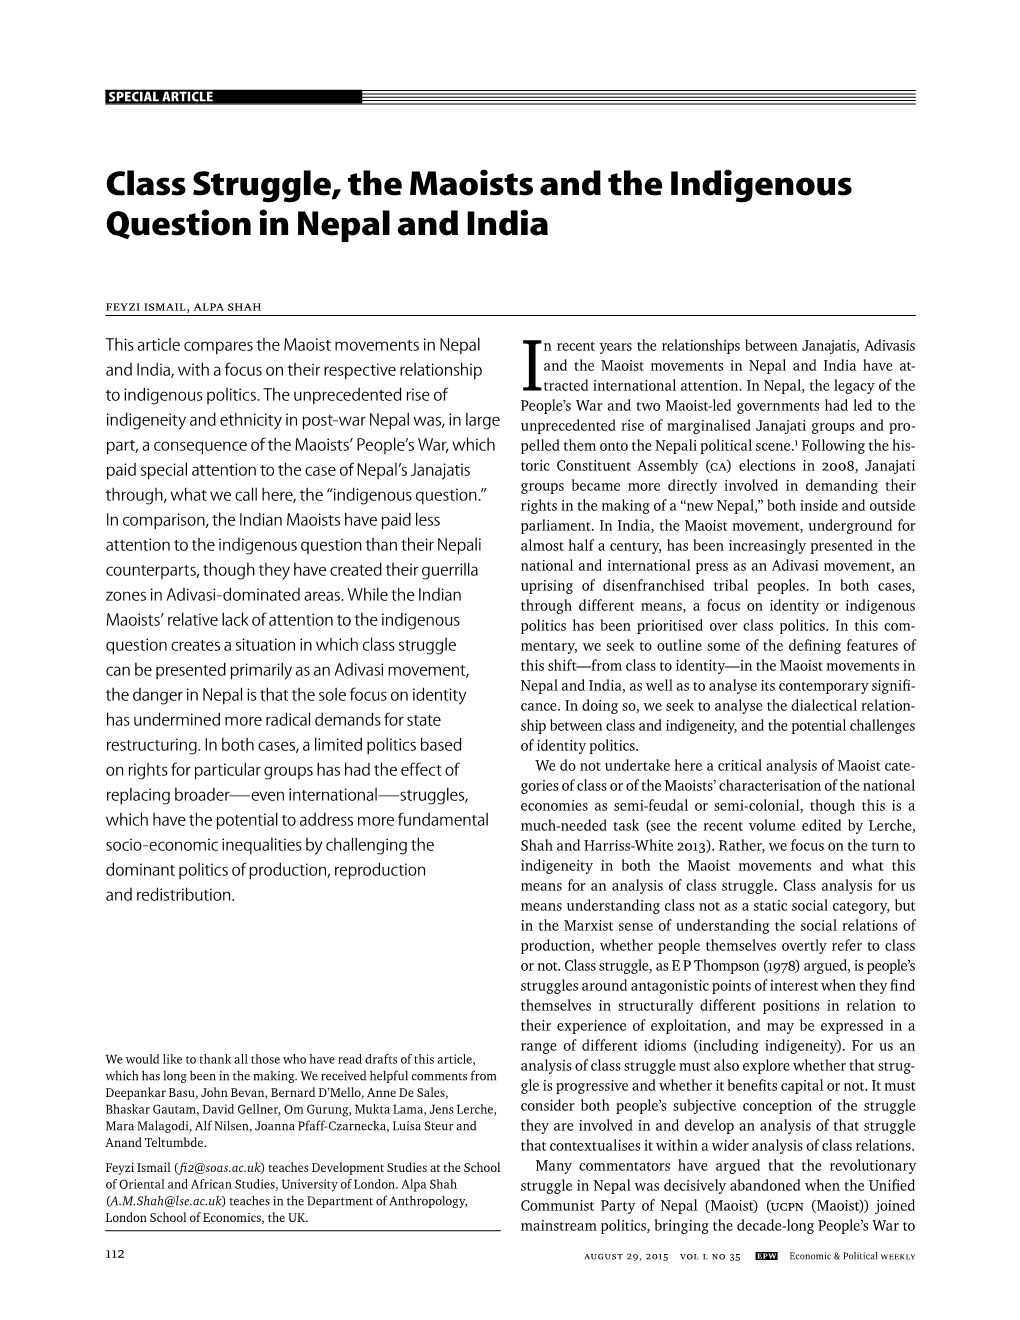 Class Struggle, the Maoists and the Indigenous Question in Nepal and India